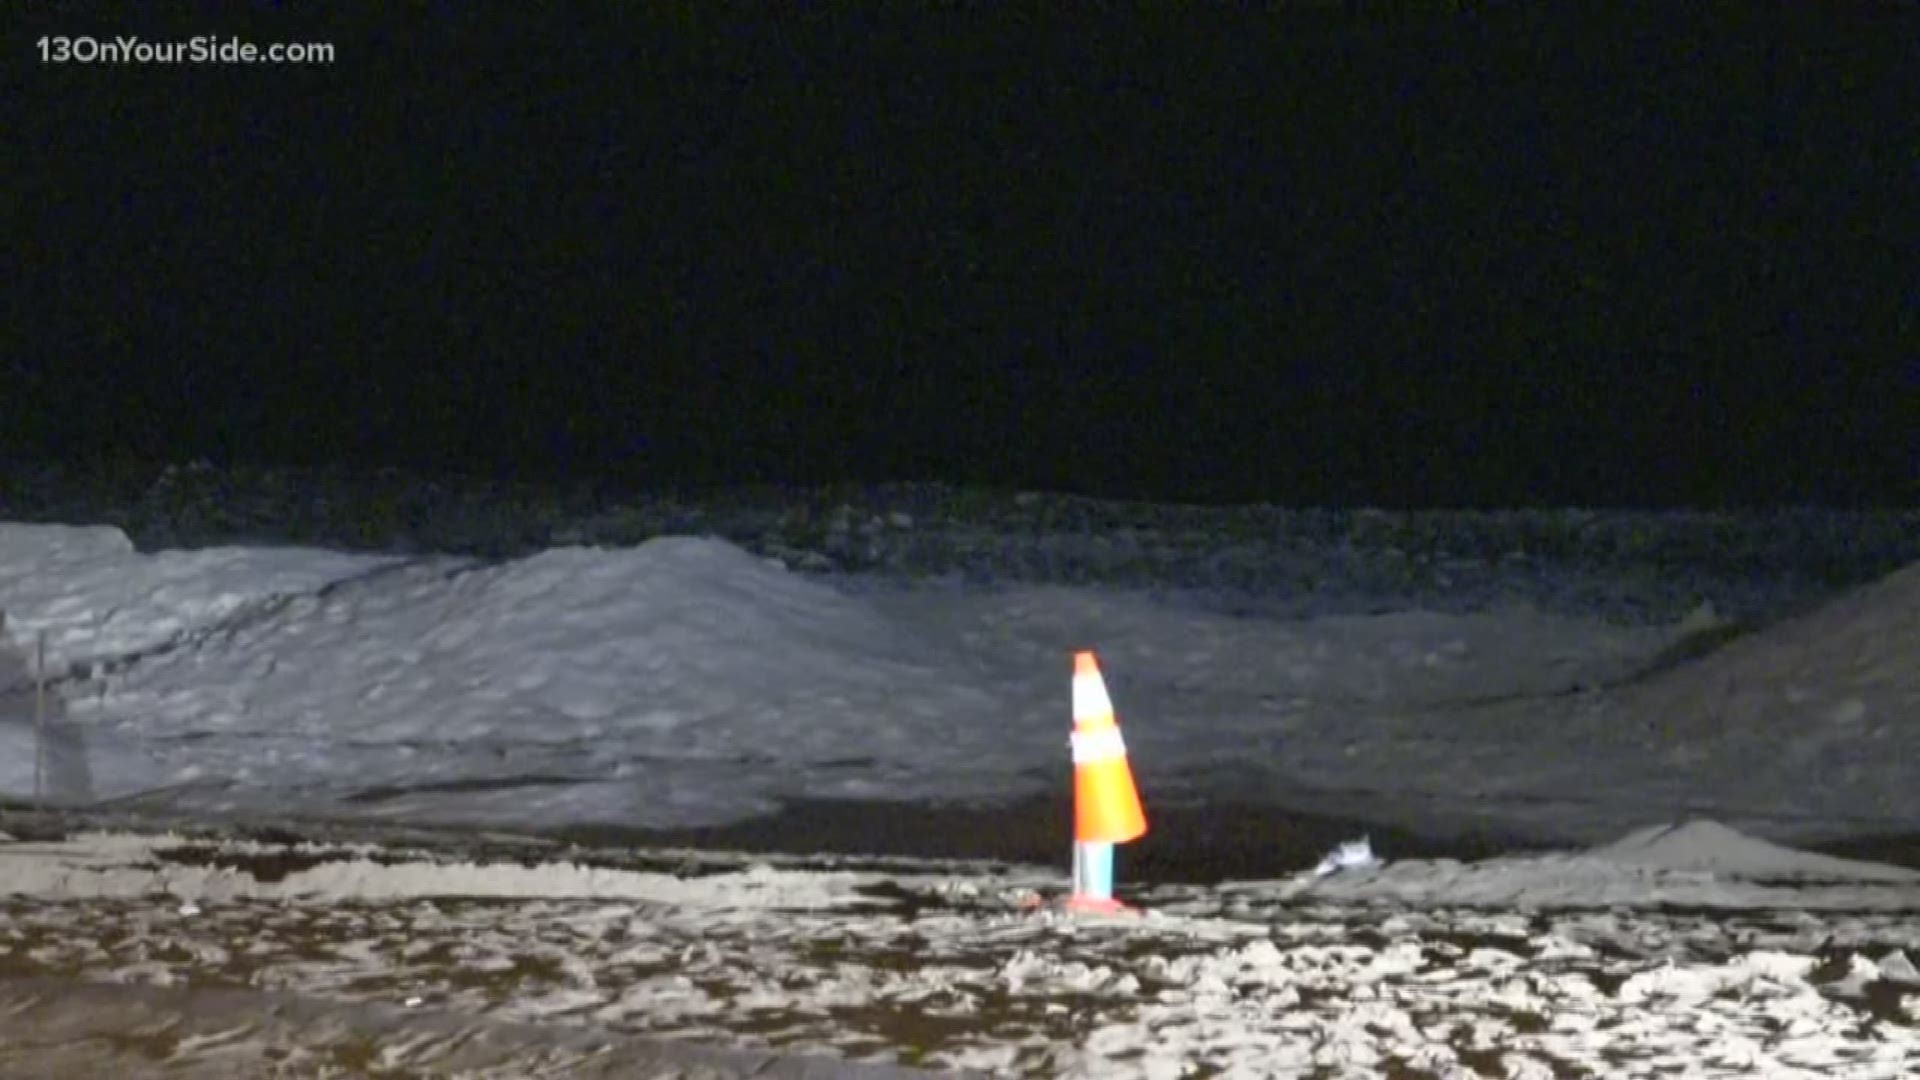 Crews were searching Lake Michigan Tuesday night on a report of a missing man but suspended it due to poor conditions.